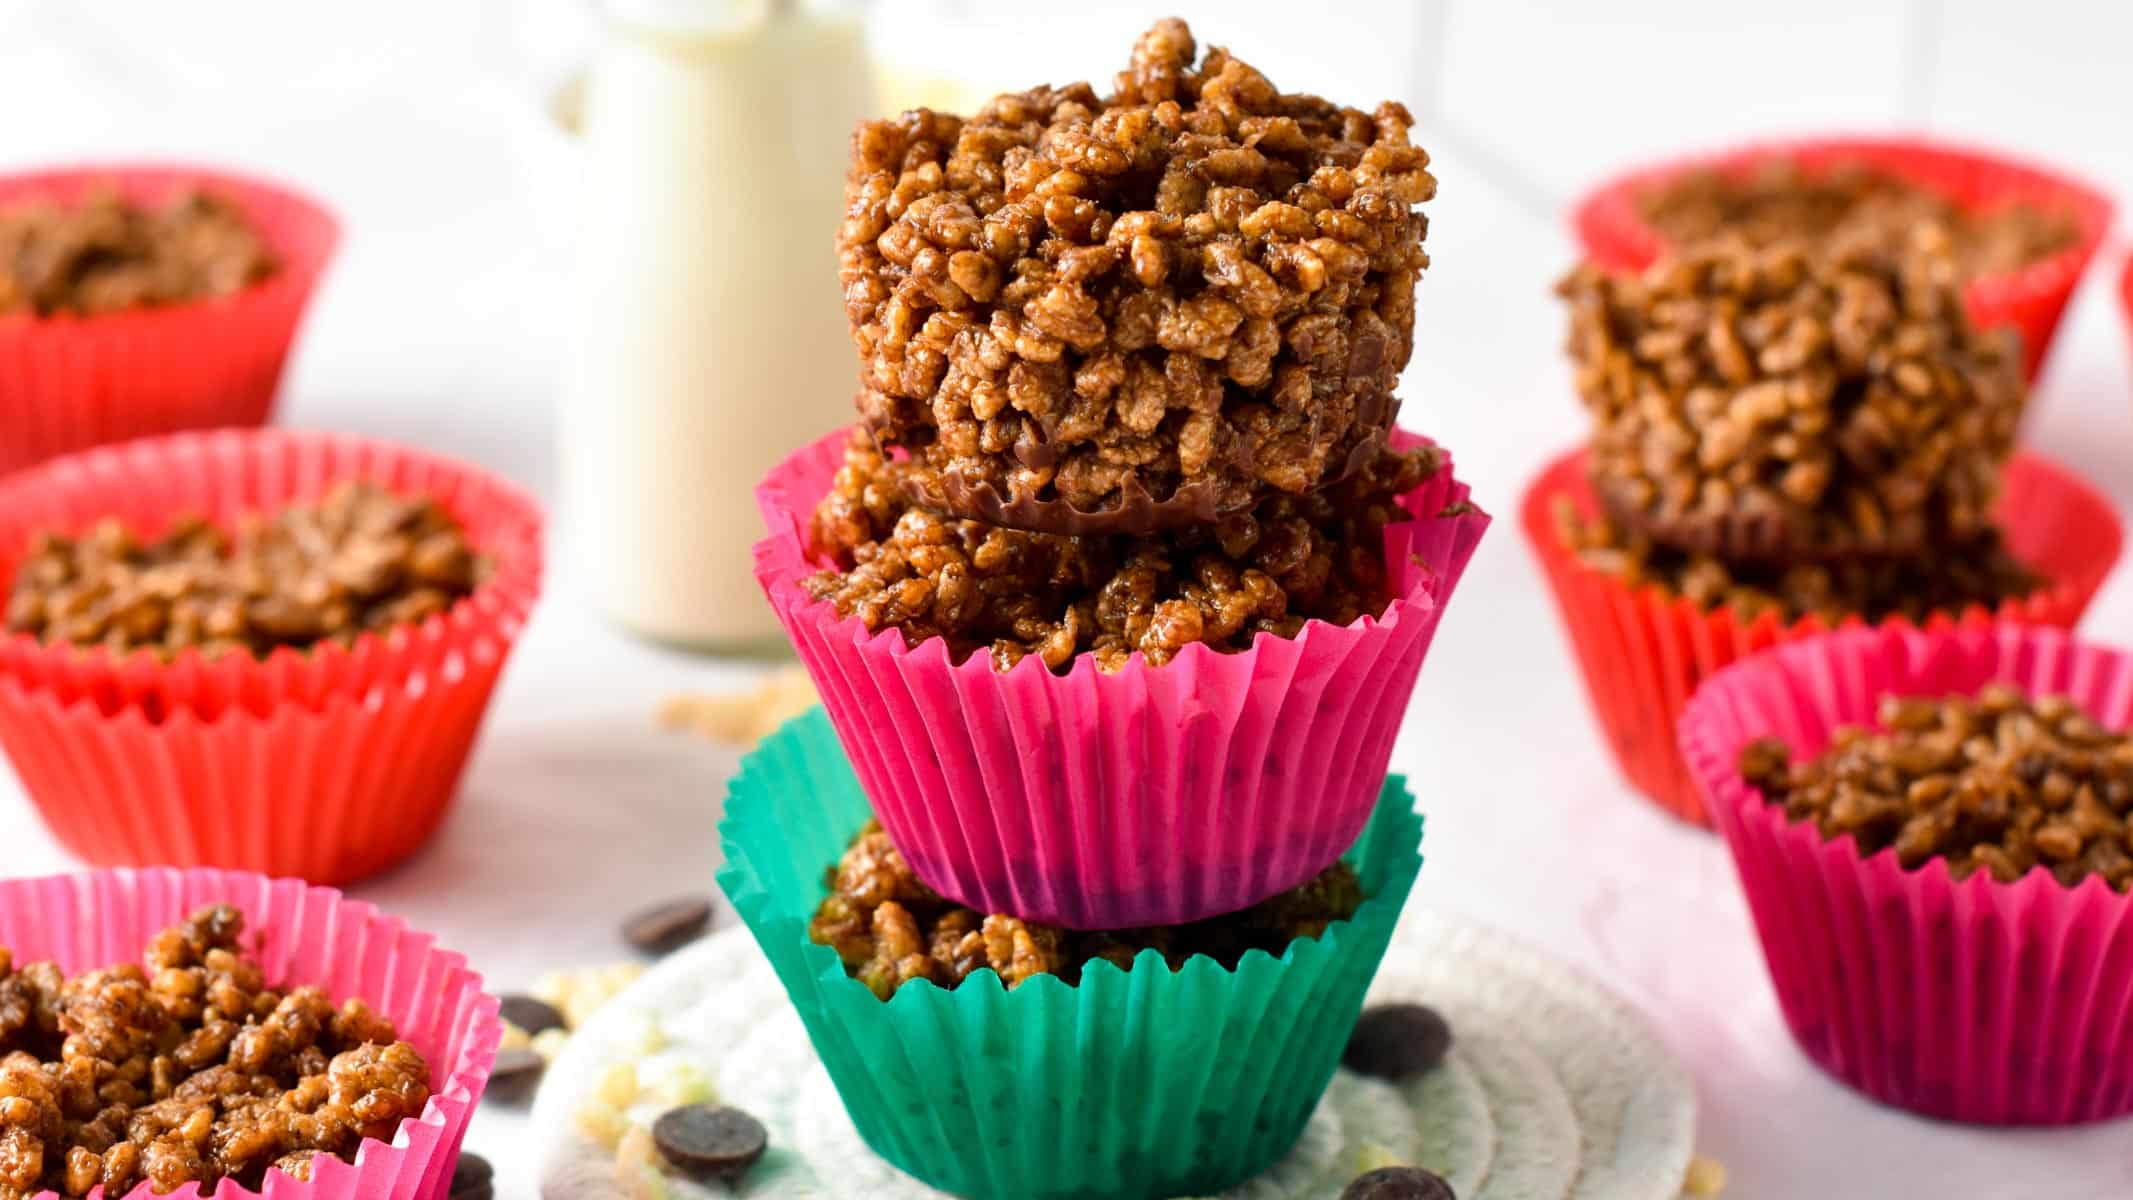 This healthy chocolate crackle recipe is an easy no-bake crunchy chocolate treat made with just 6 ingredients.